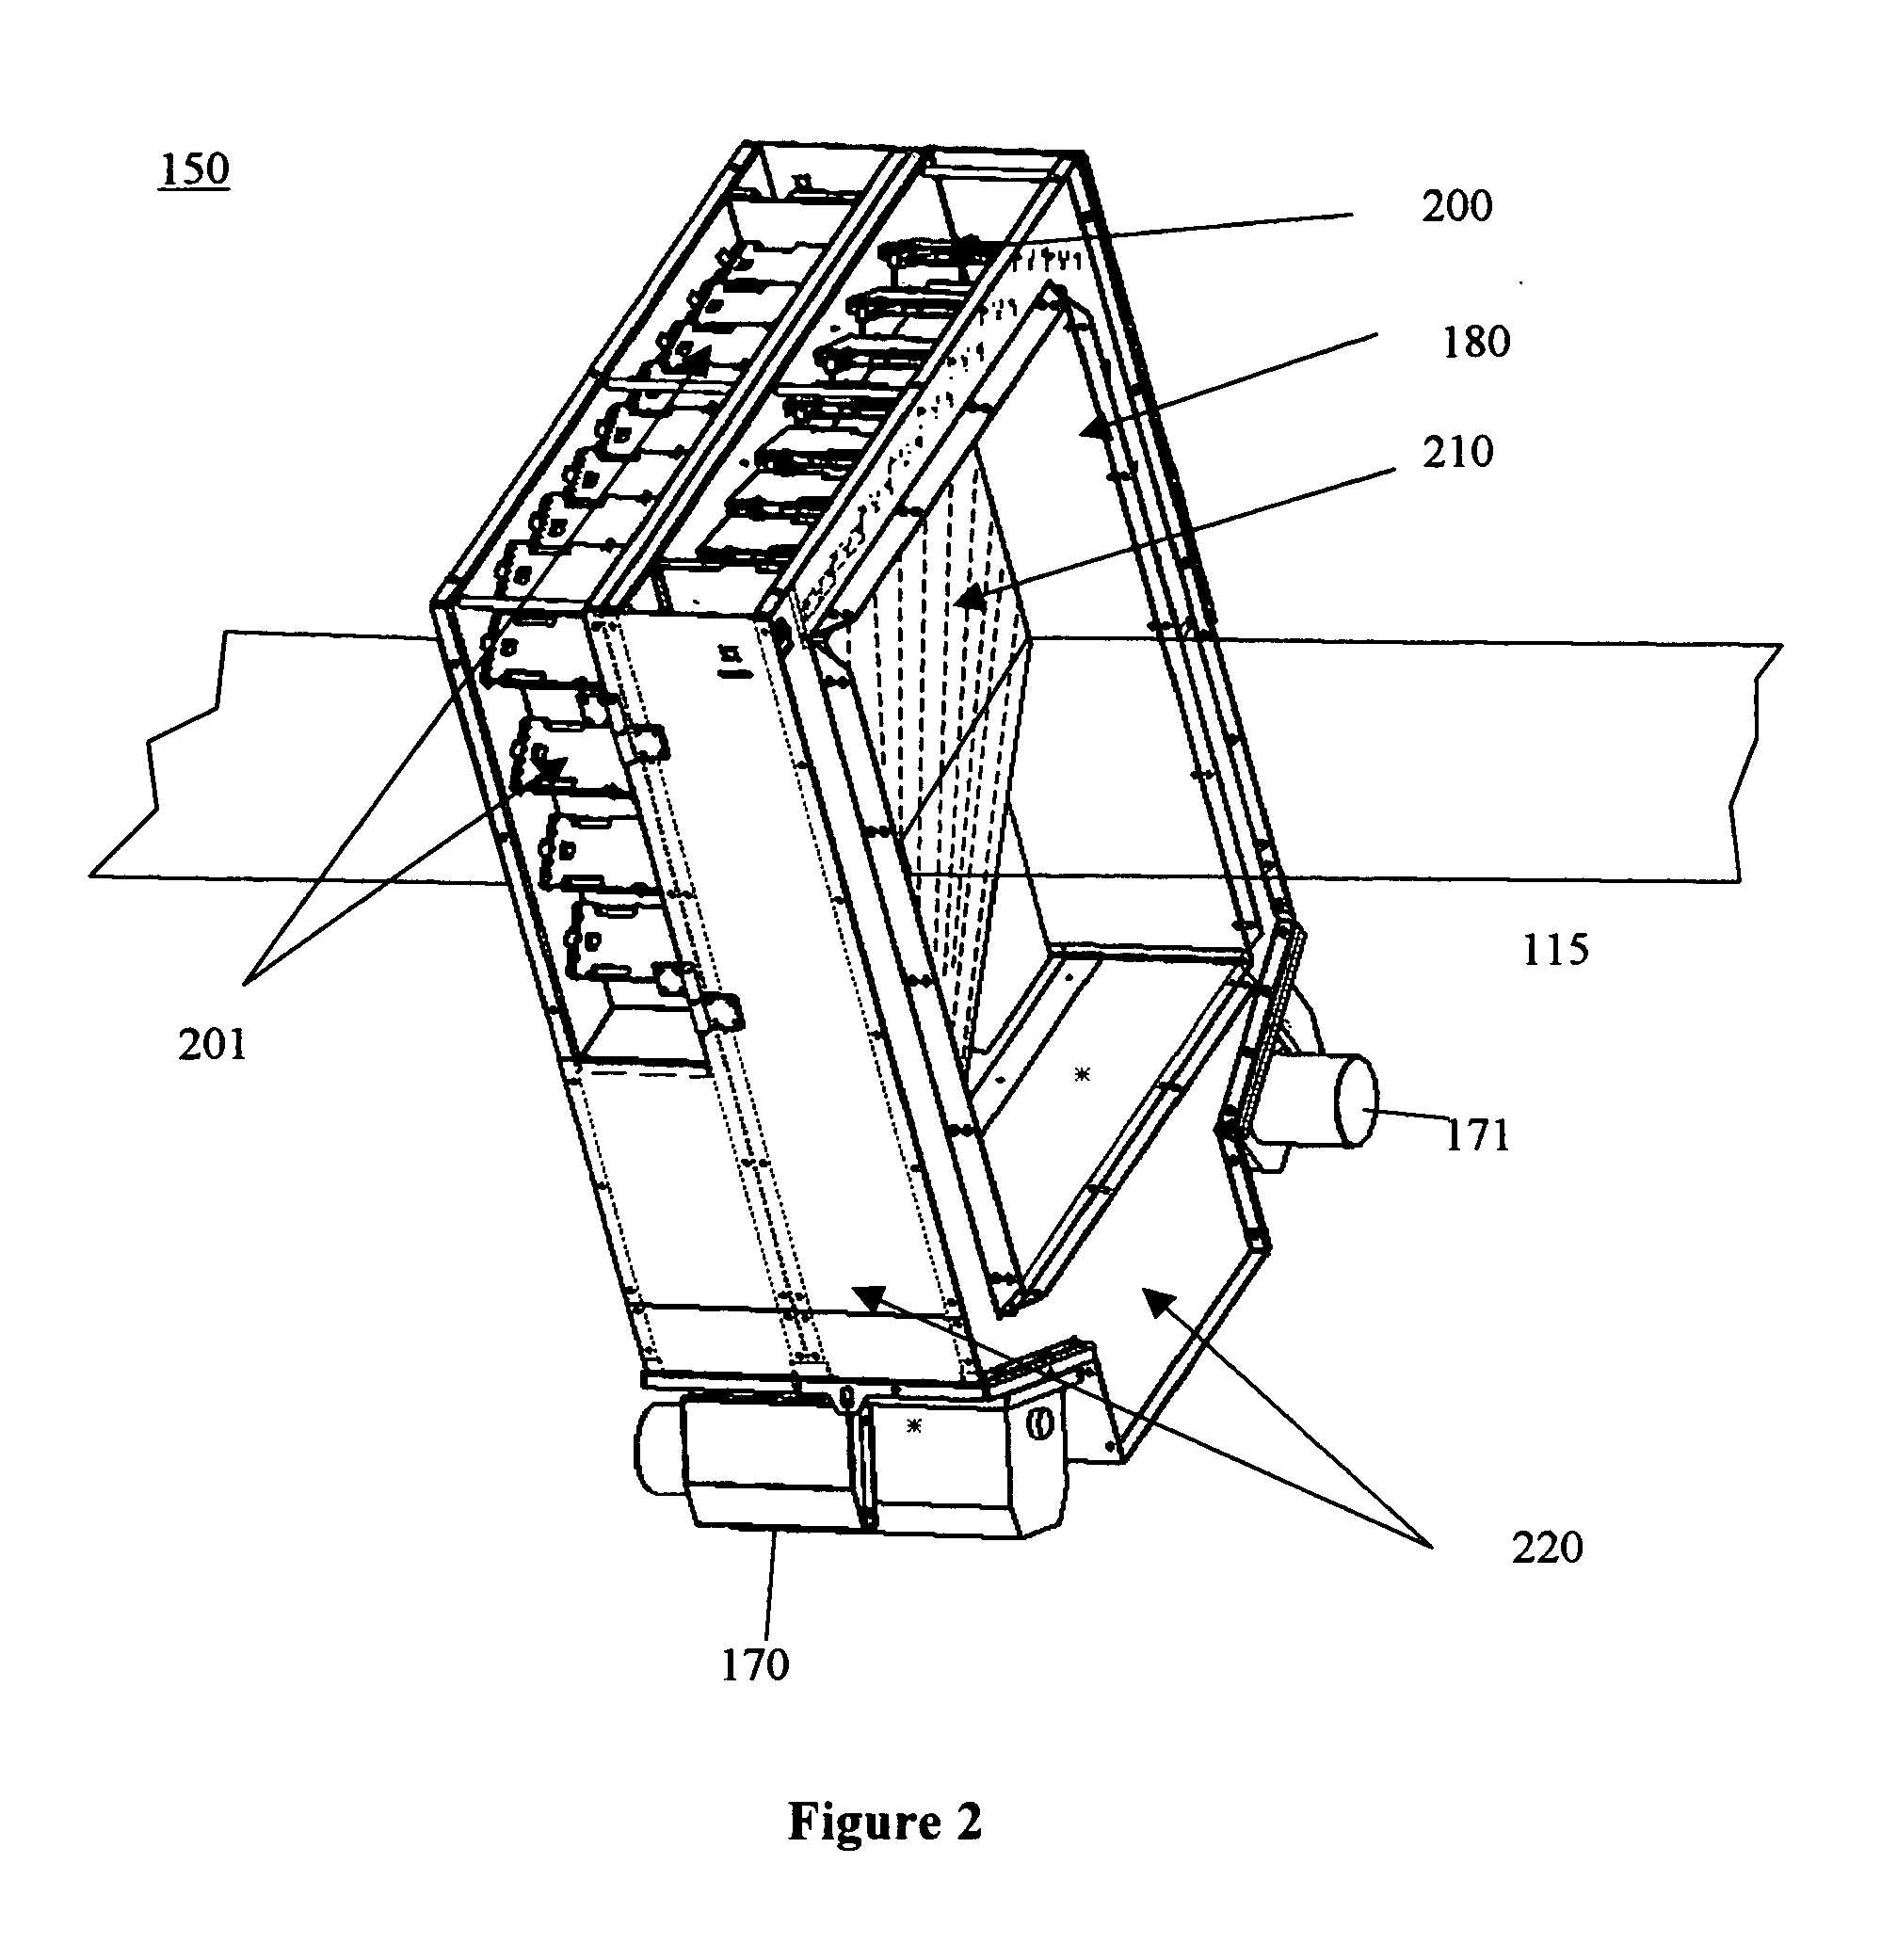 Methods and systems for the rapid detection of concealed objects